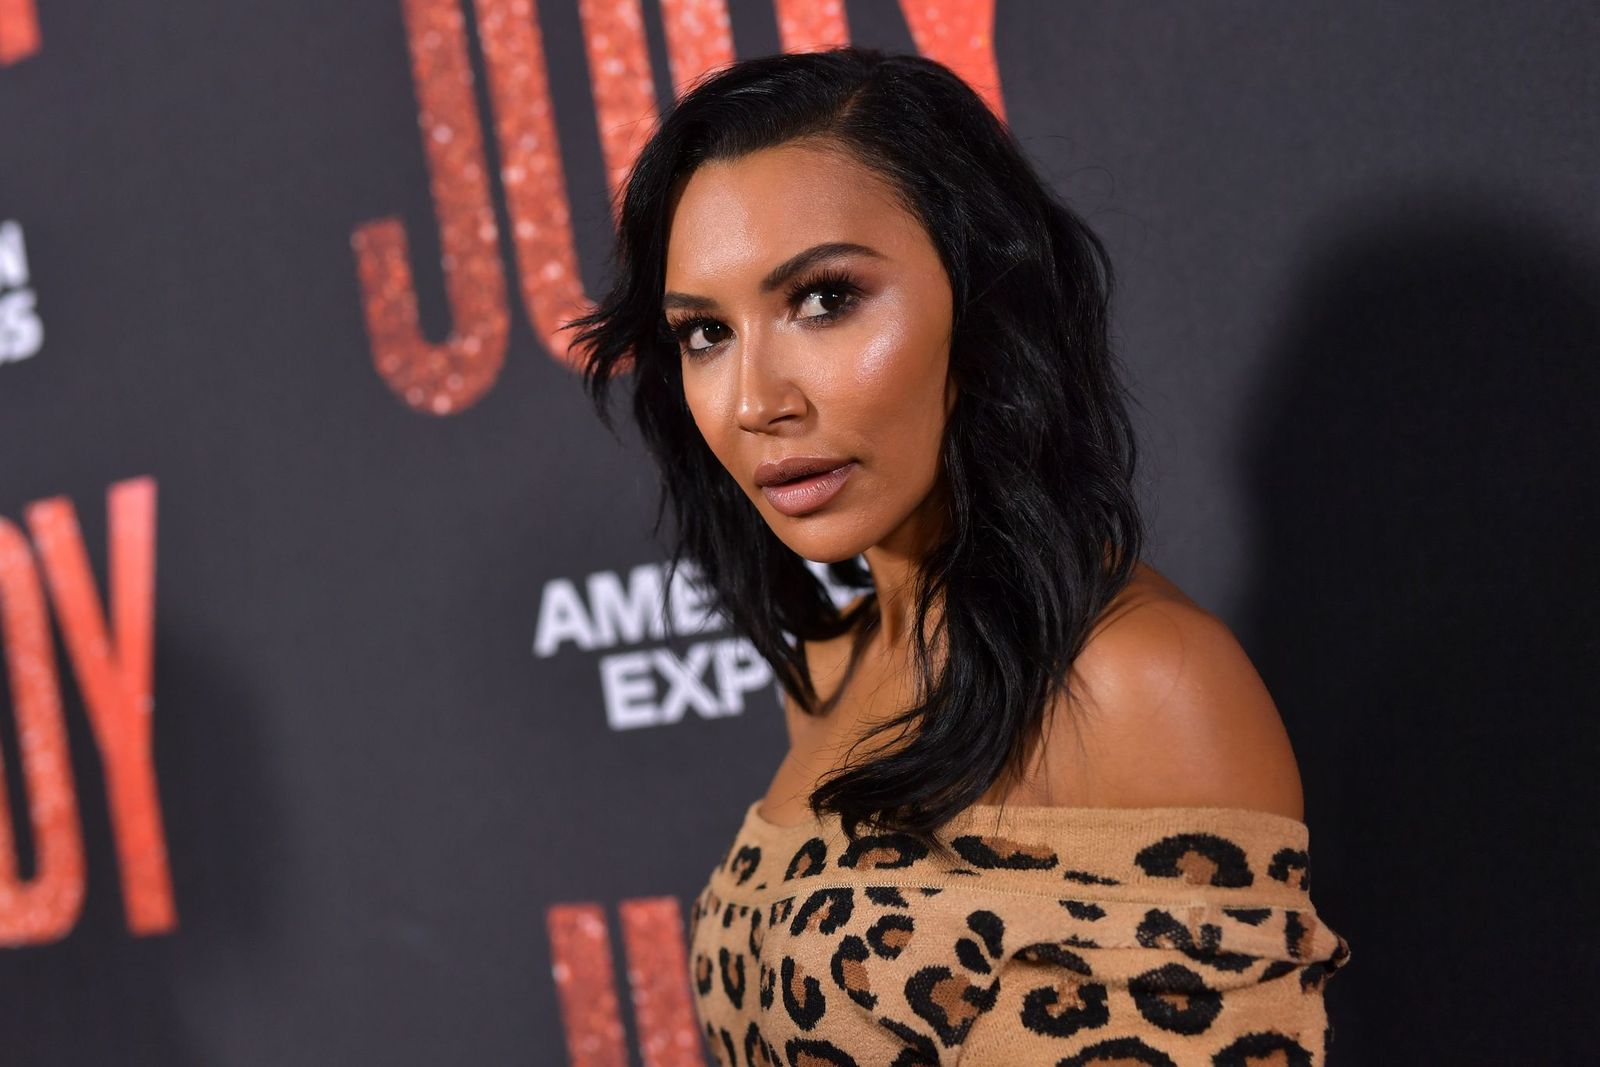 Naya Rivera at the Los Angeles premiere of "Judy" on September 19, 2019, in Beverly Hills, California | Source: Getty Images